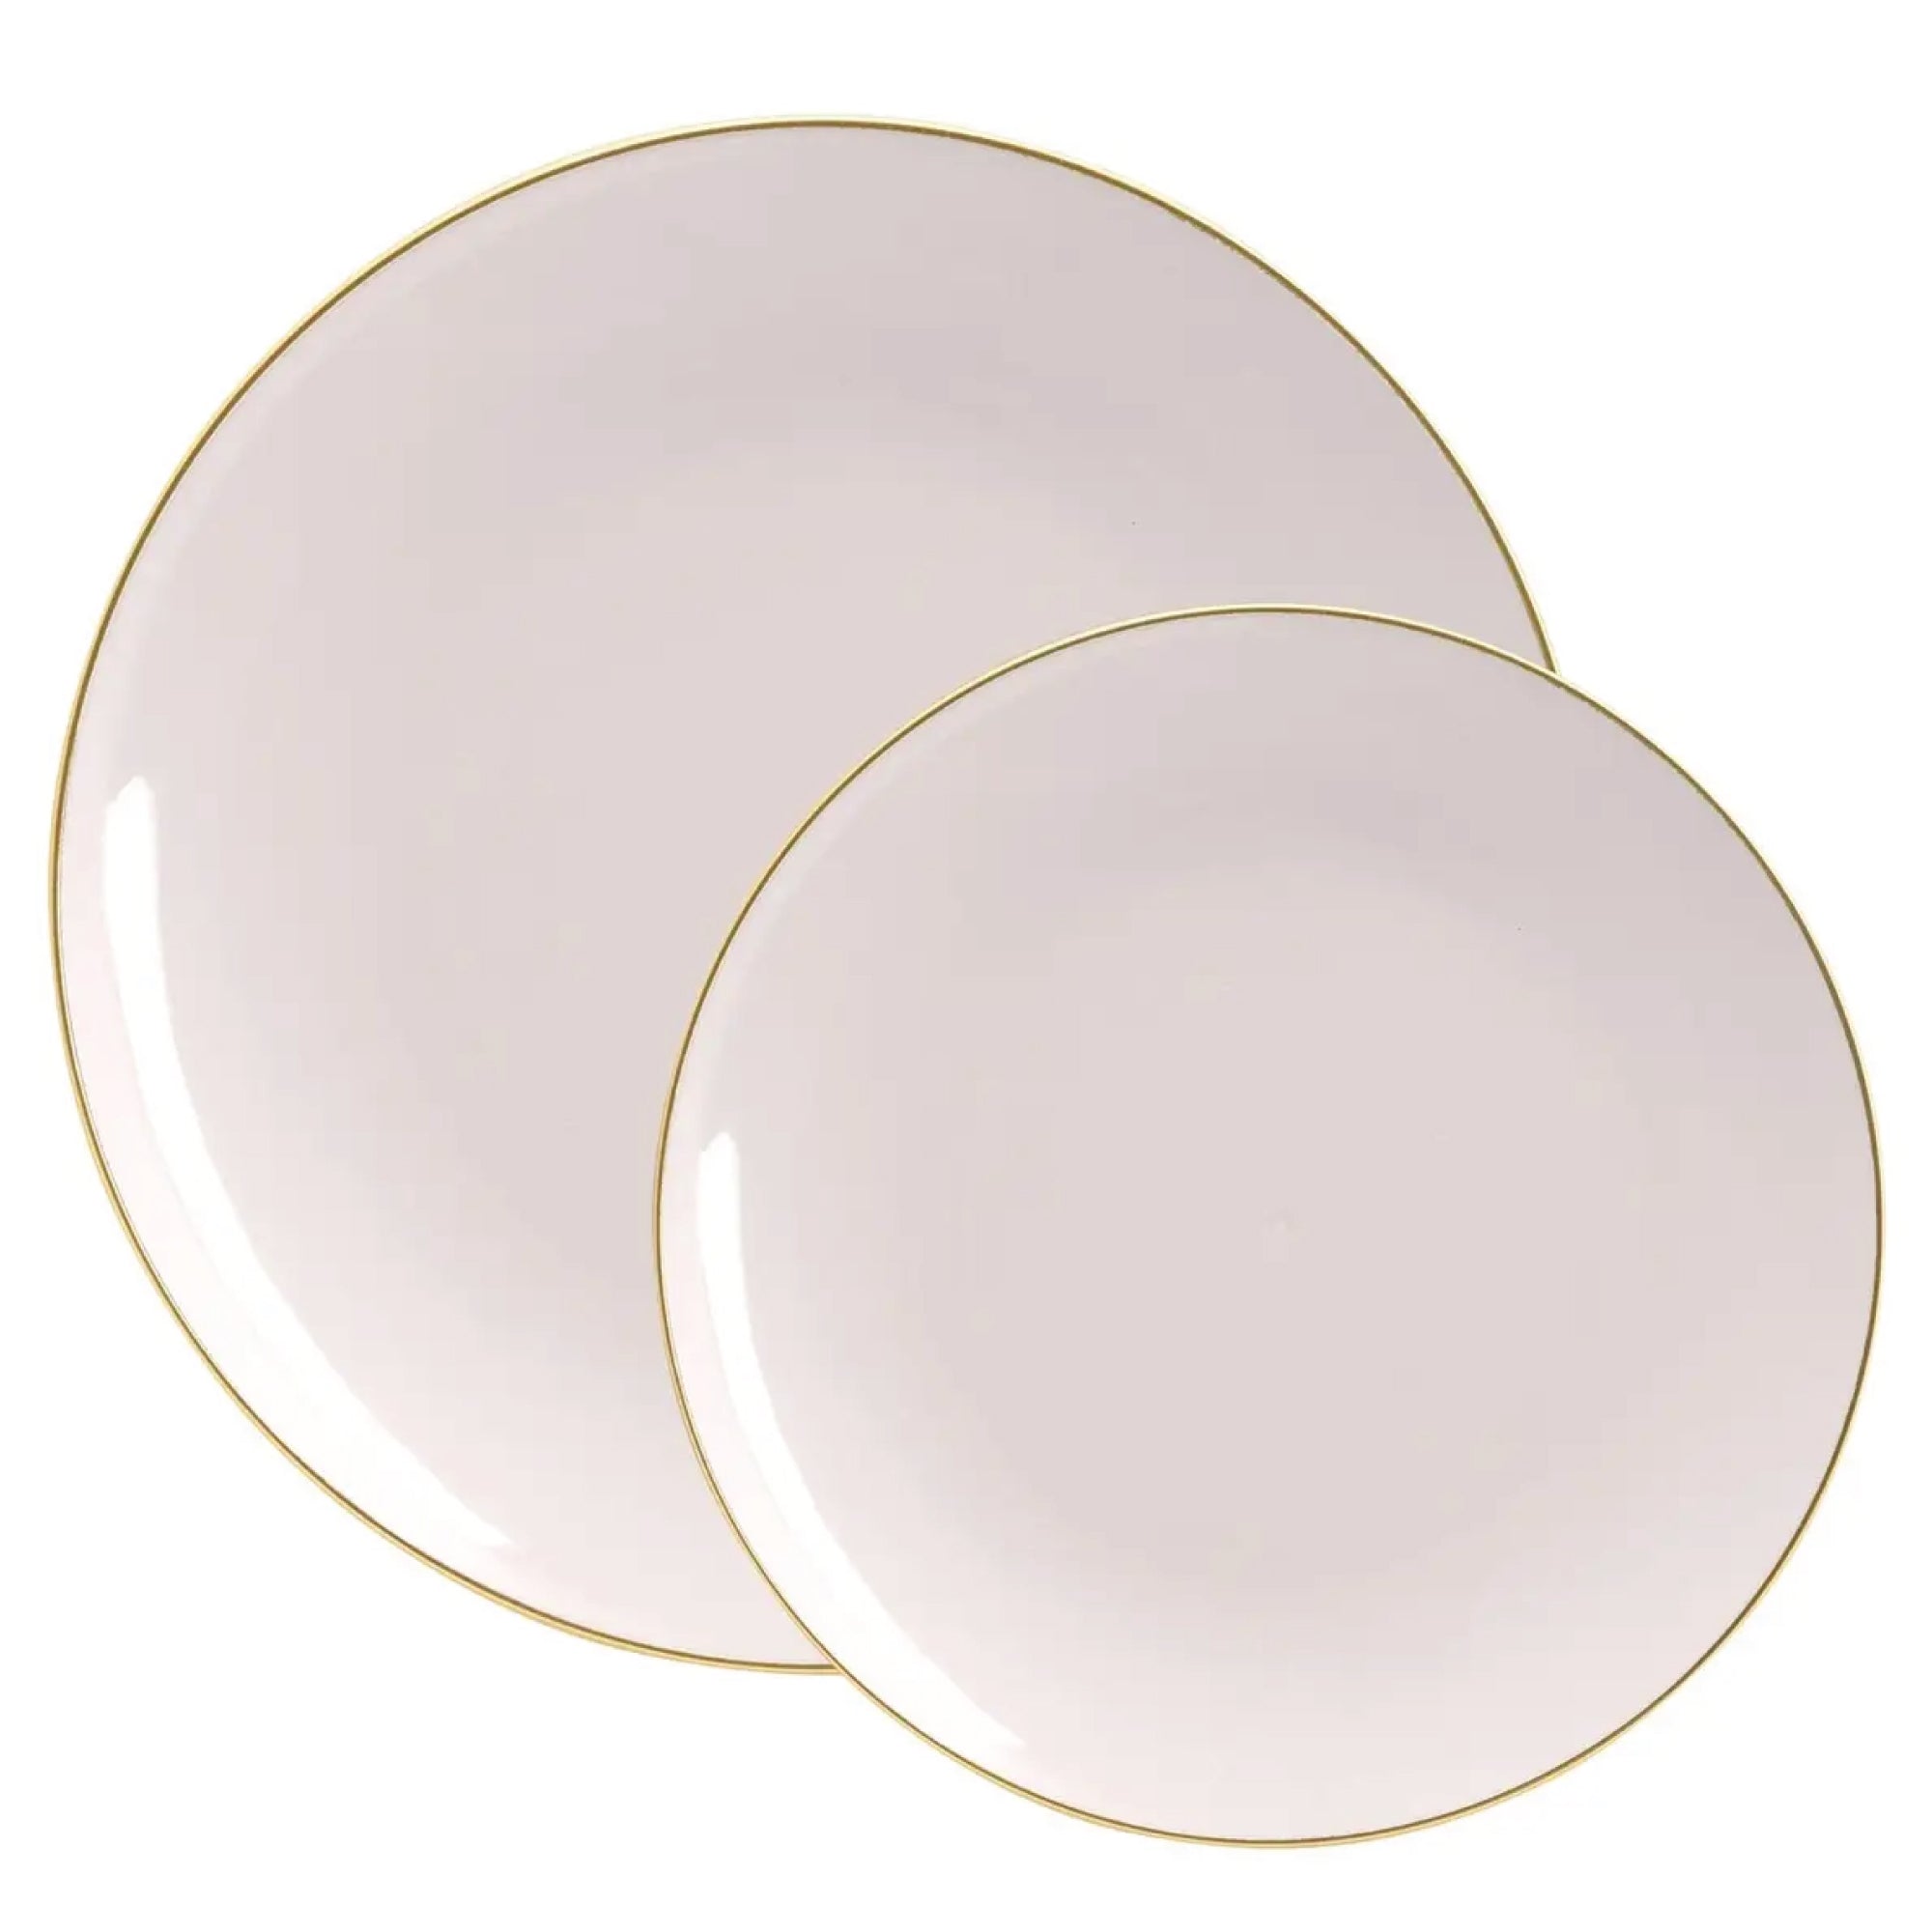 Linen Gray w/ Gold Rim Plastic Dinner Plates 10ct | The Party Darling